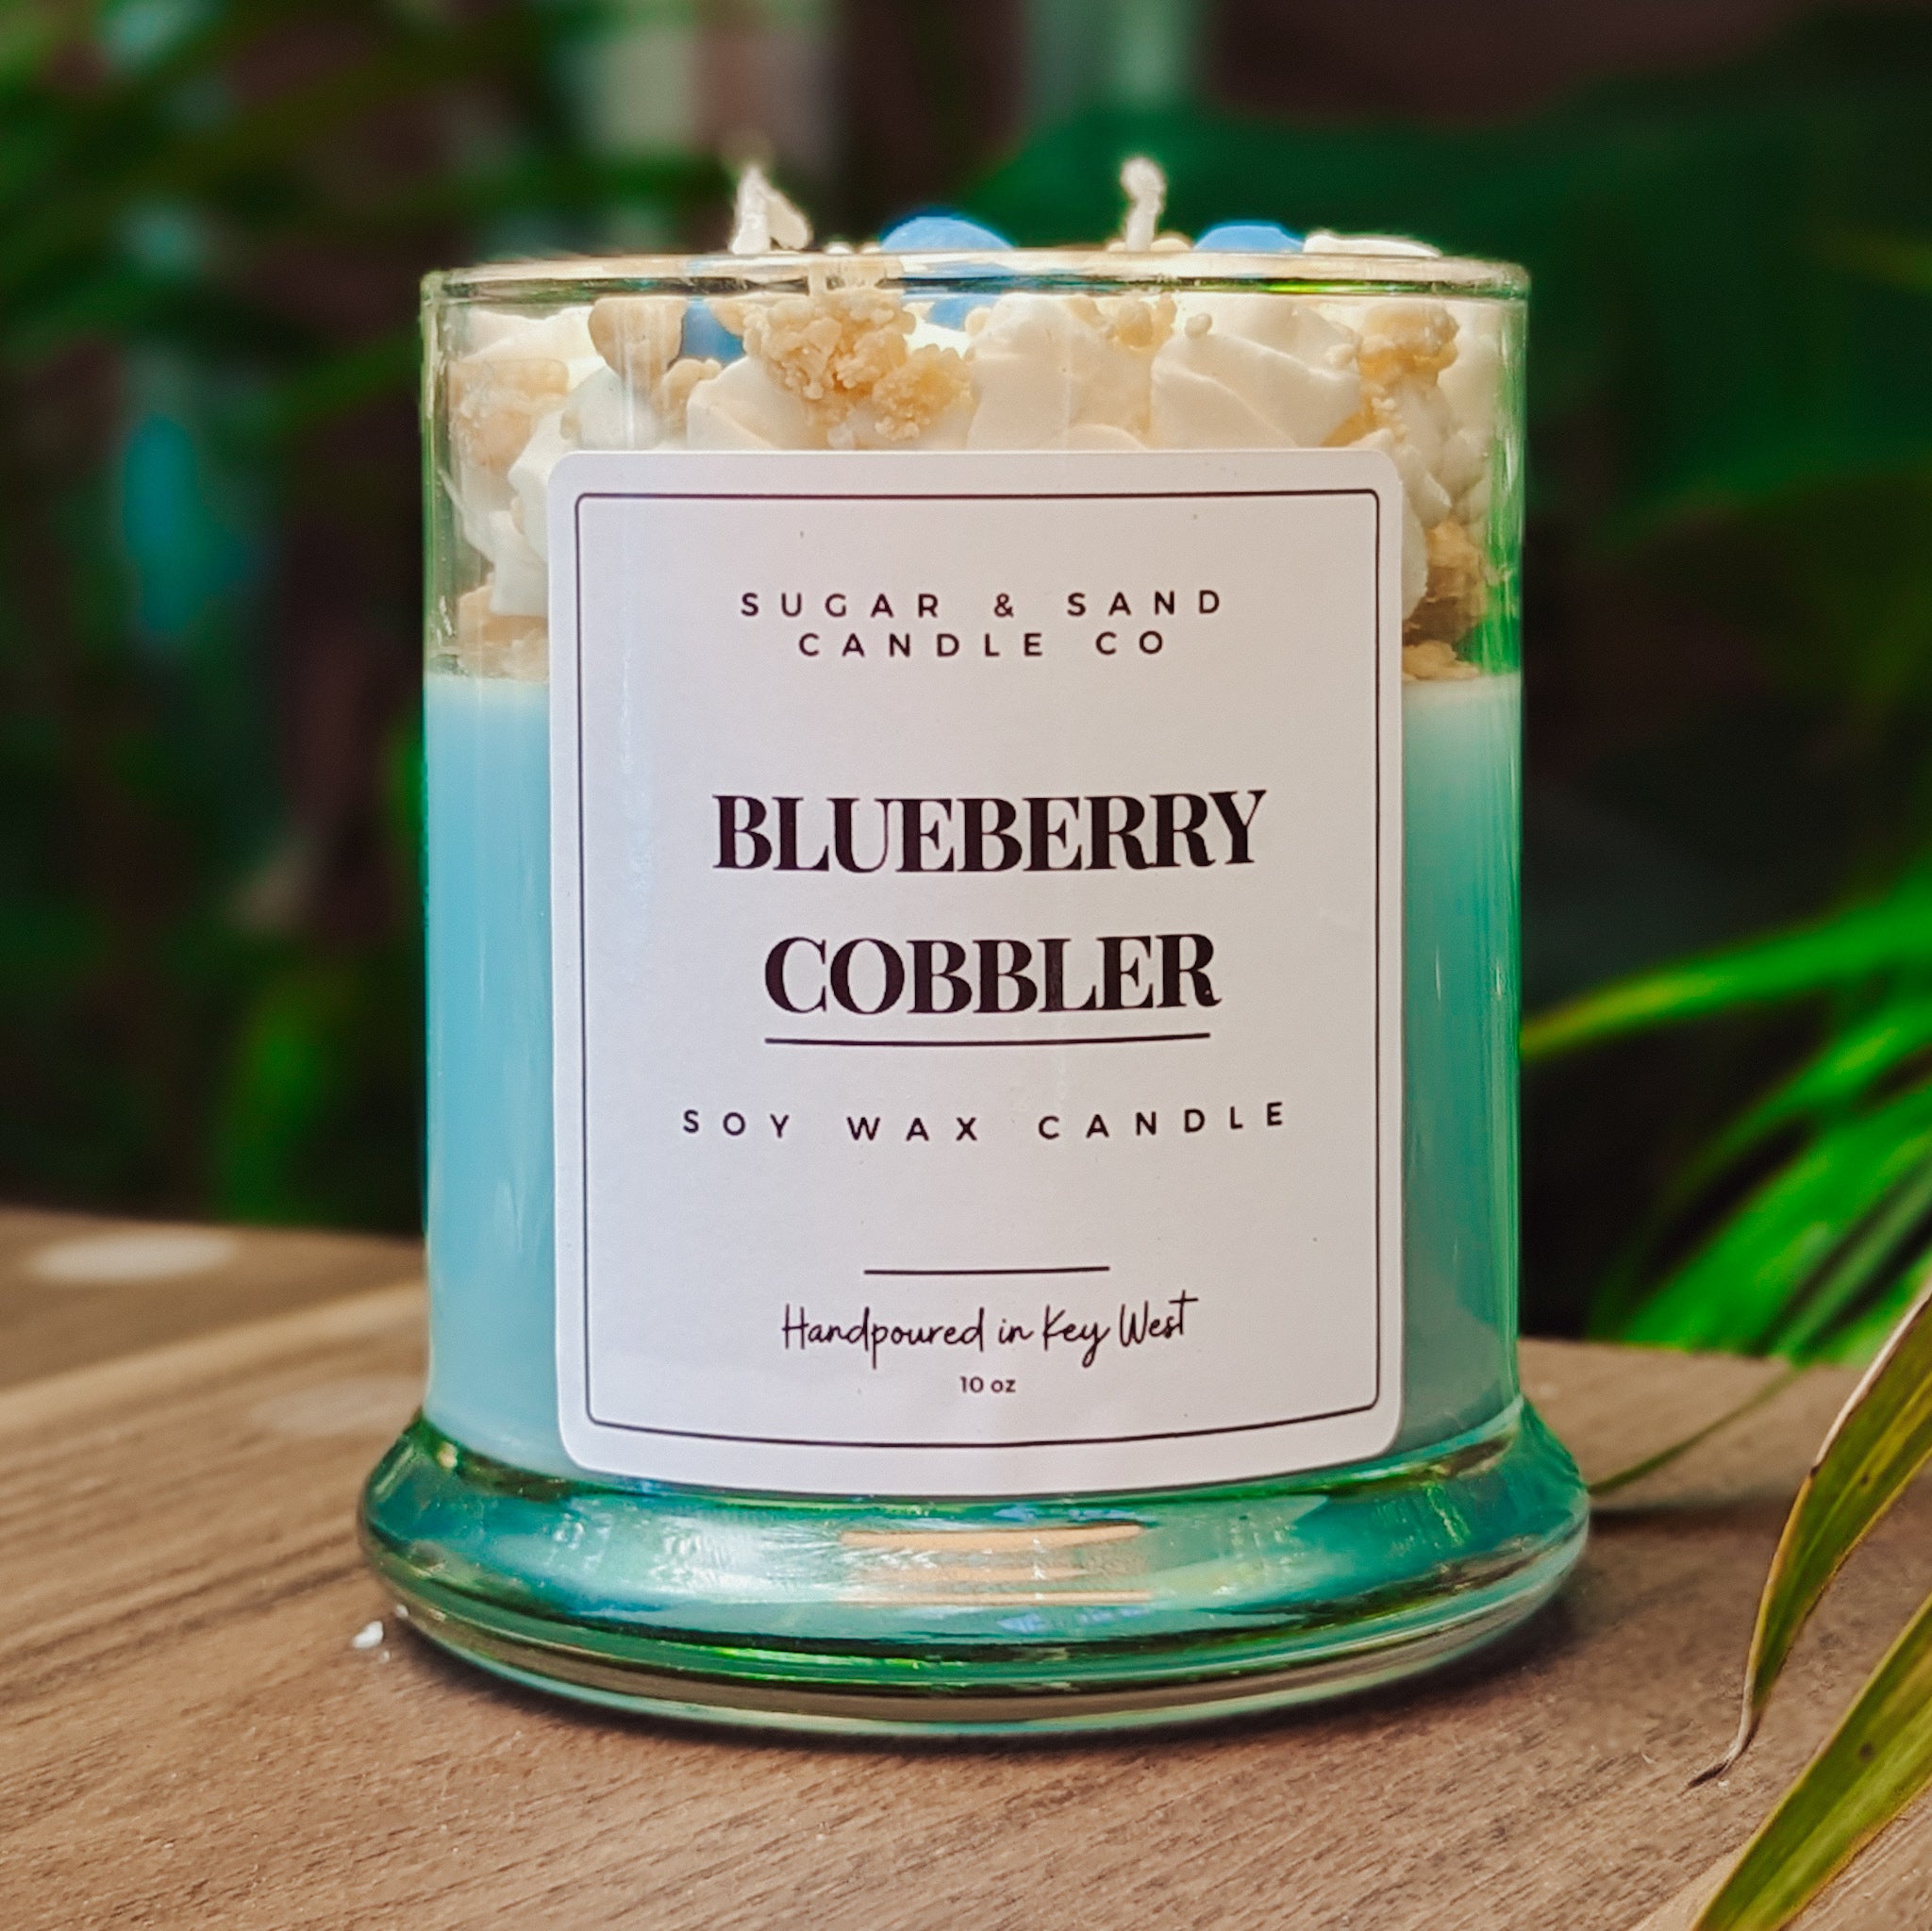 Blueberry Pie Scented Soy Wax Candle - ScentSimple Candle Co.